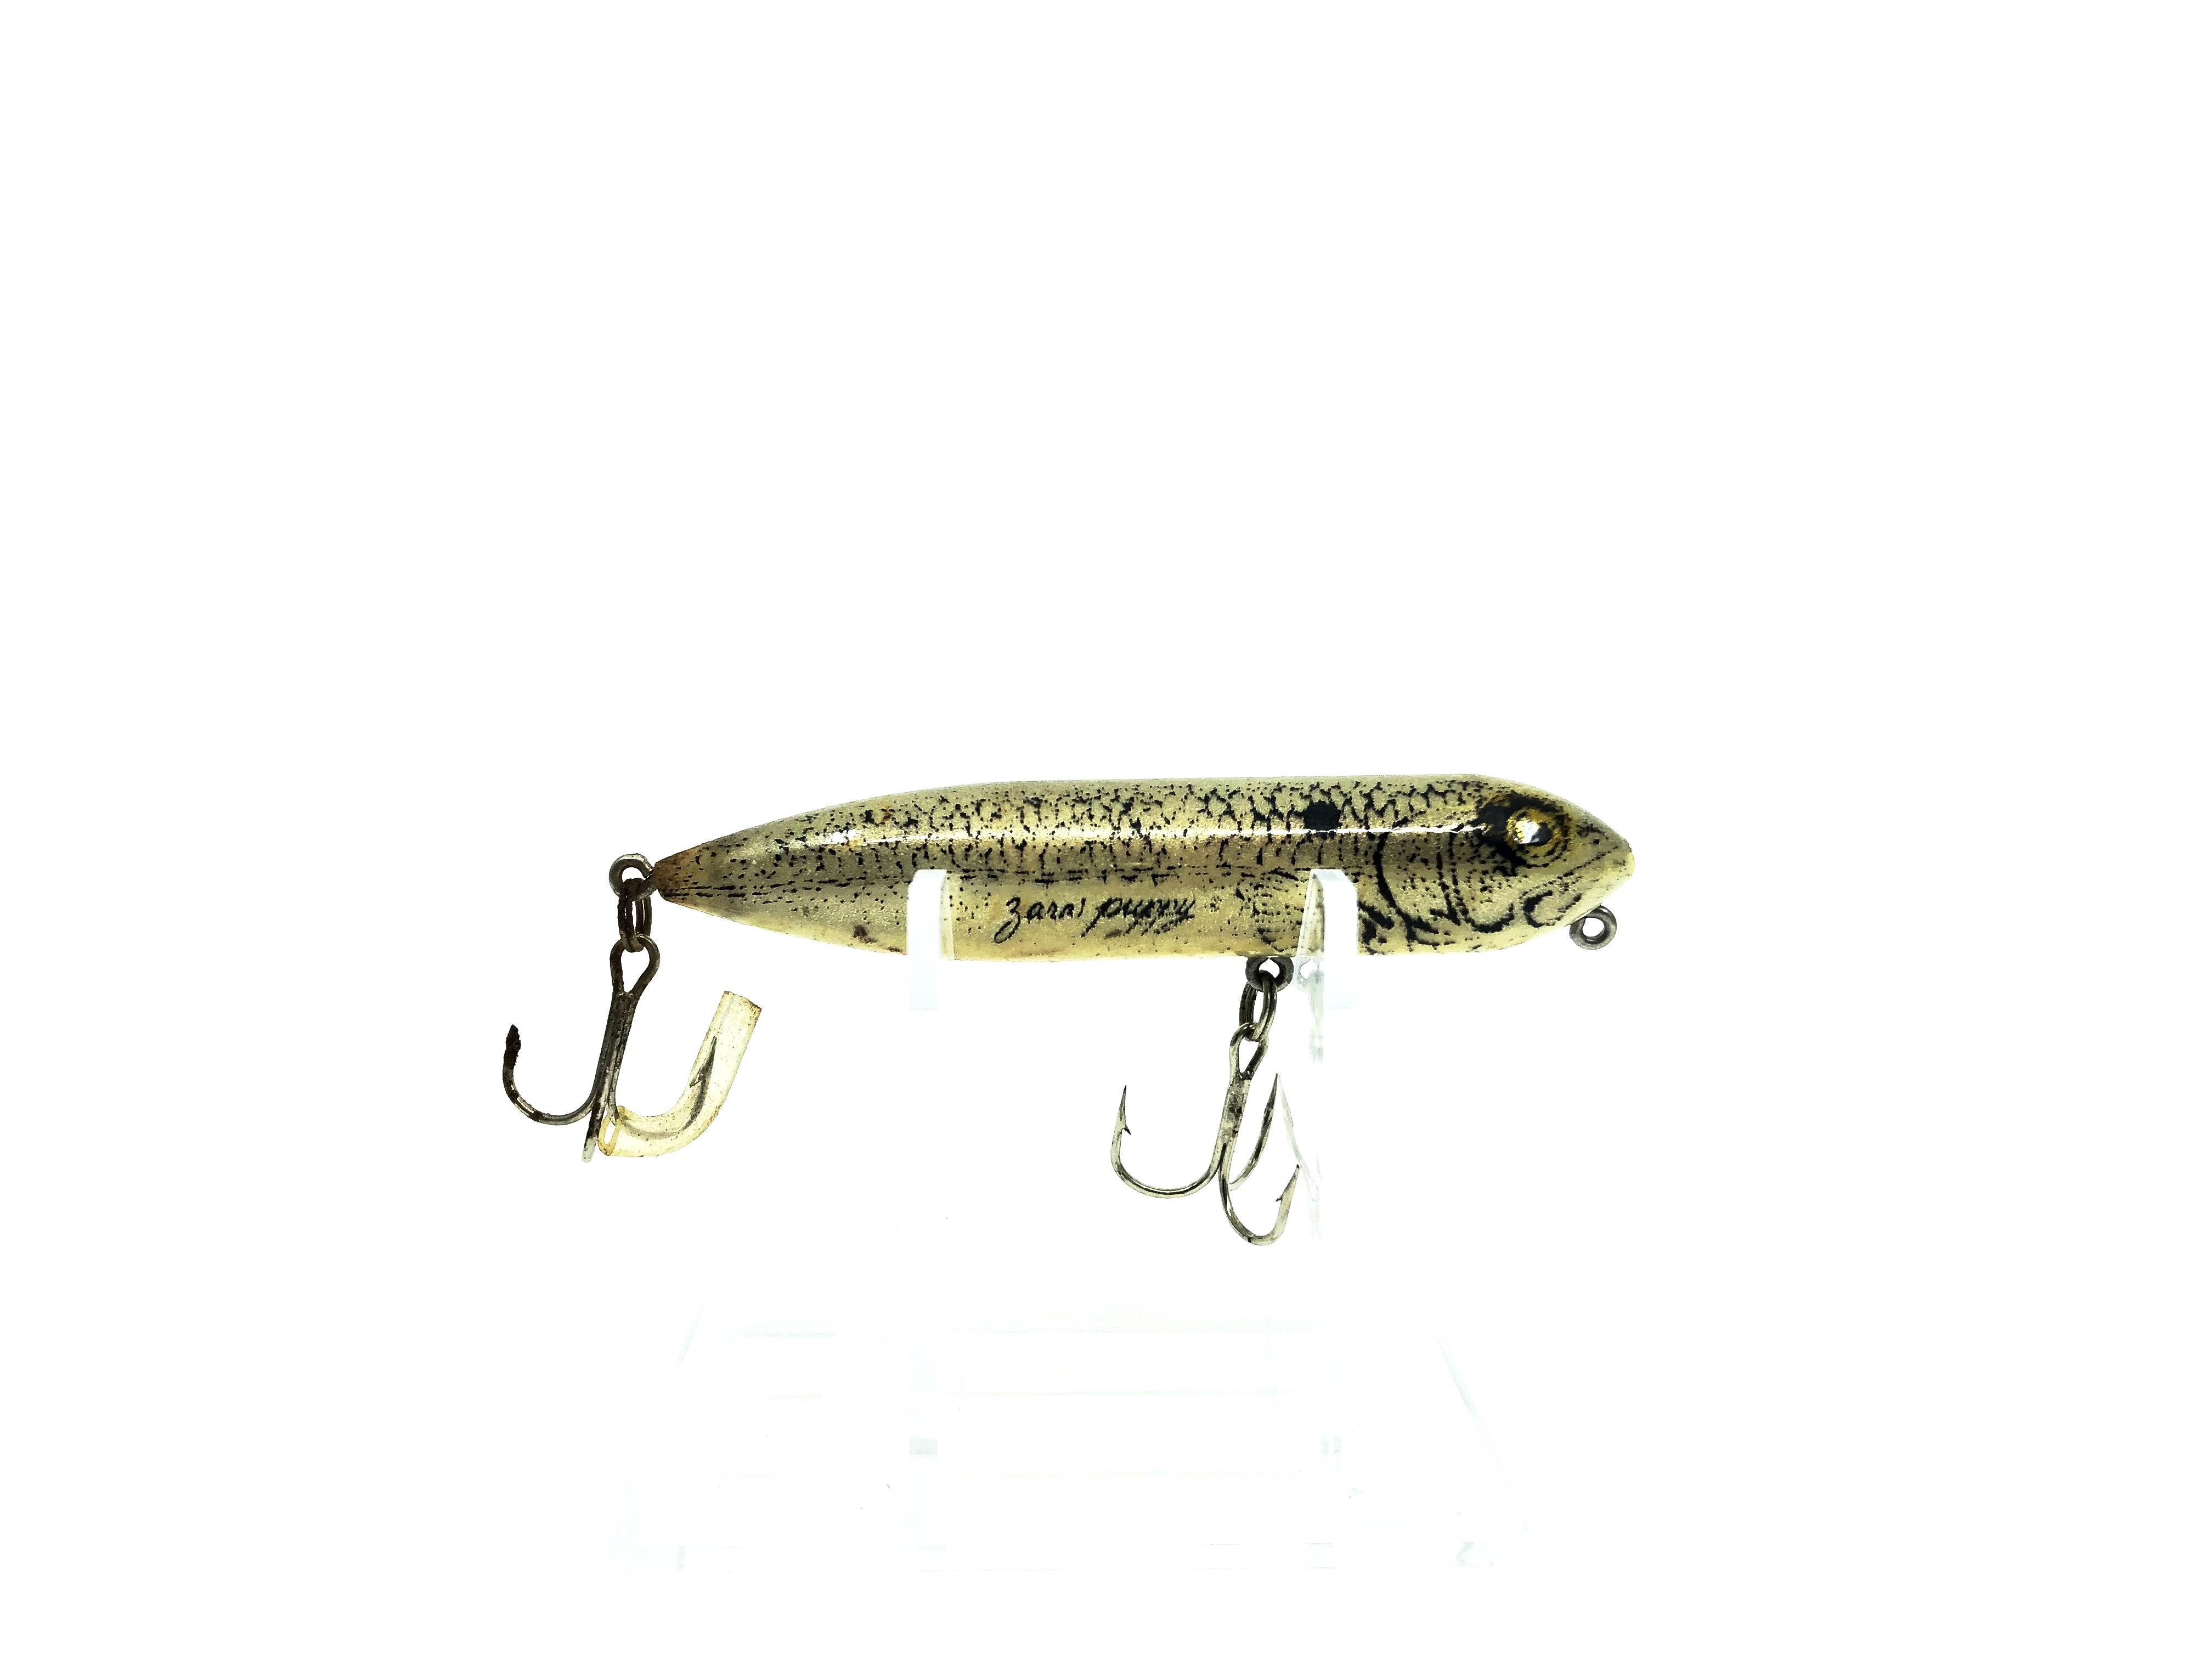 JMS Lures